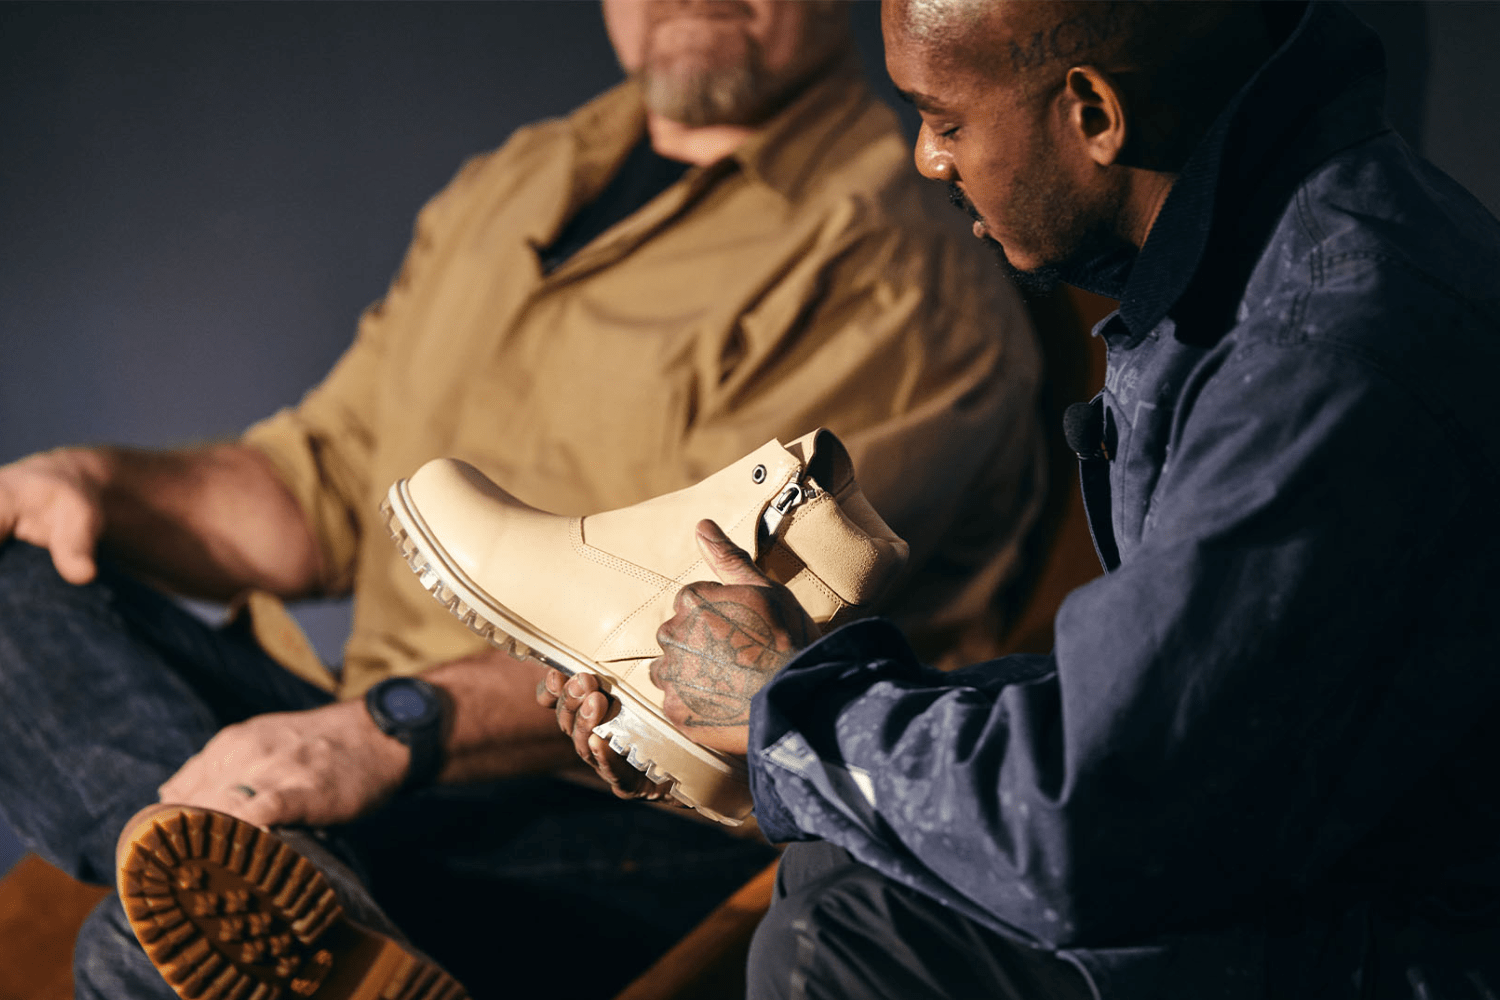 Timberland joins forces again with Samuel Ross of A-COLD-WALL*